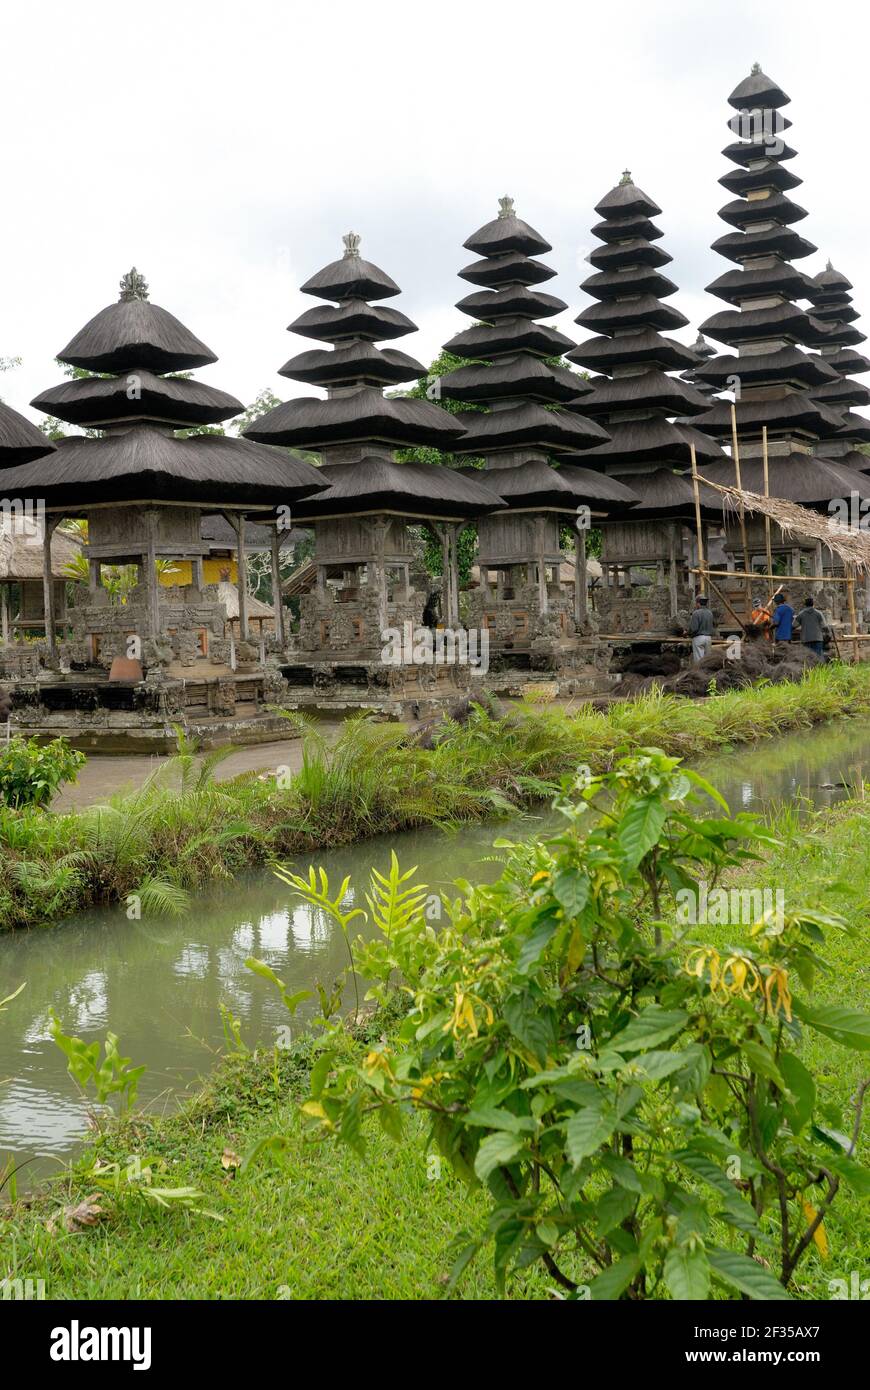 Mengwi, temple complex Pura Taman Ayun, is one of the six national temples of Bali, Indonesia Stock Photo